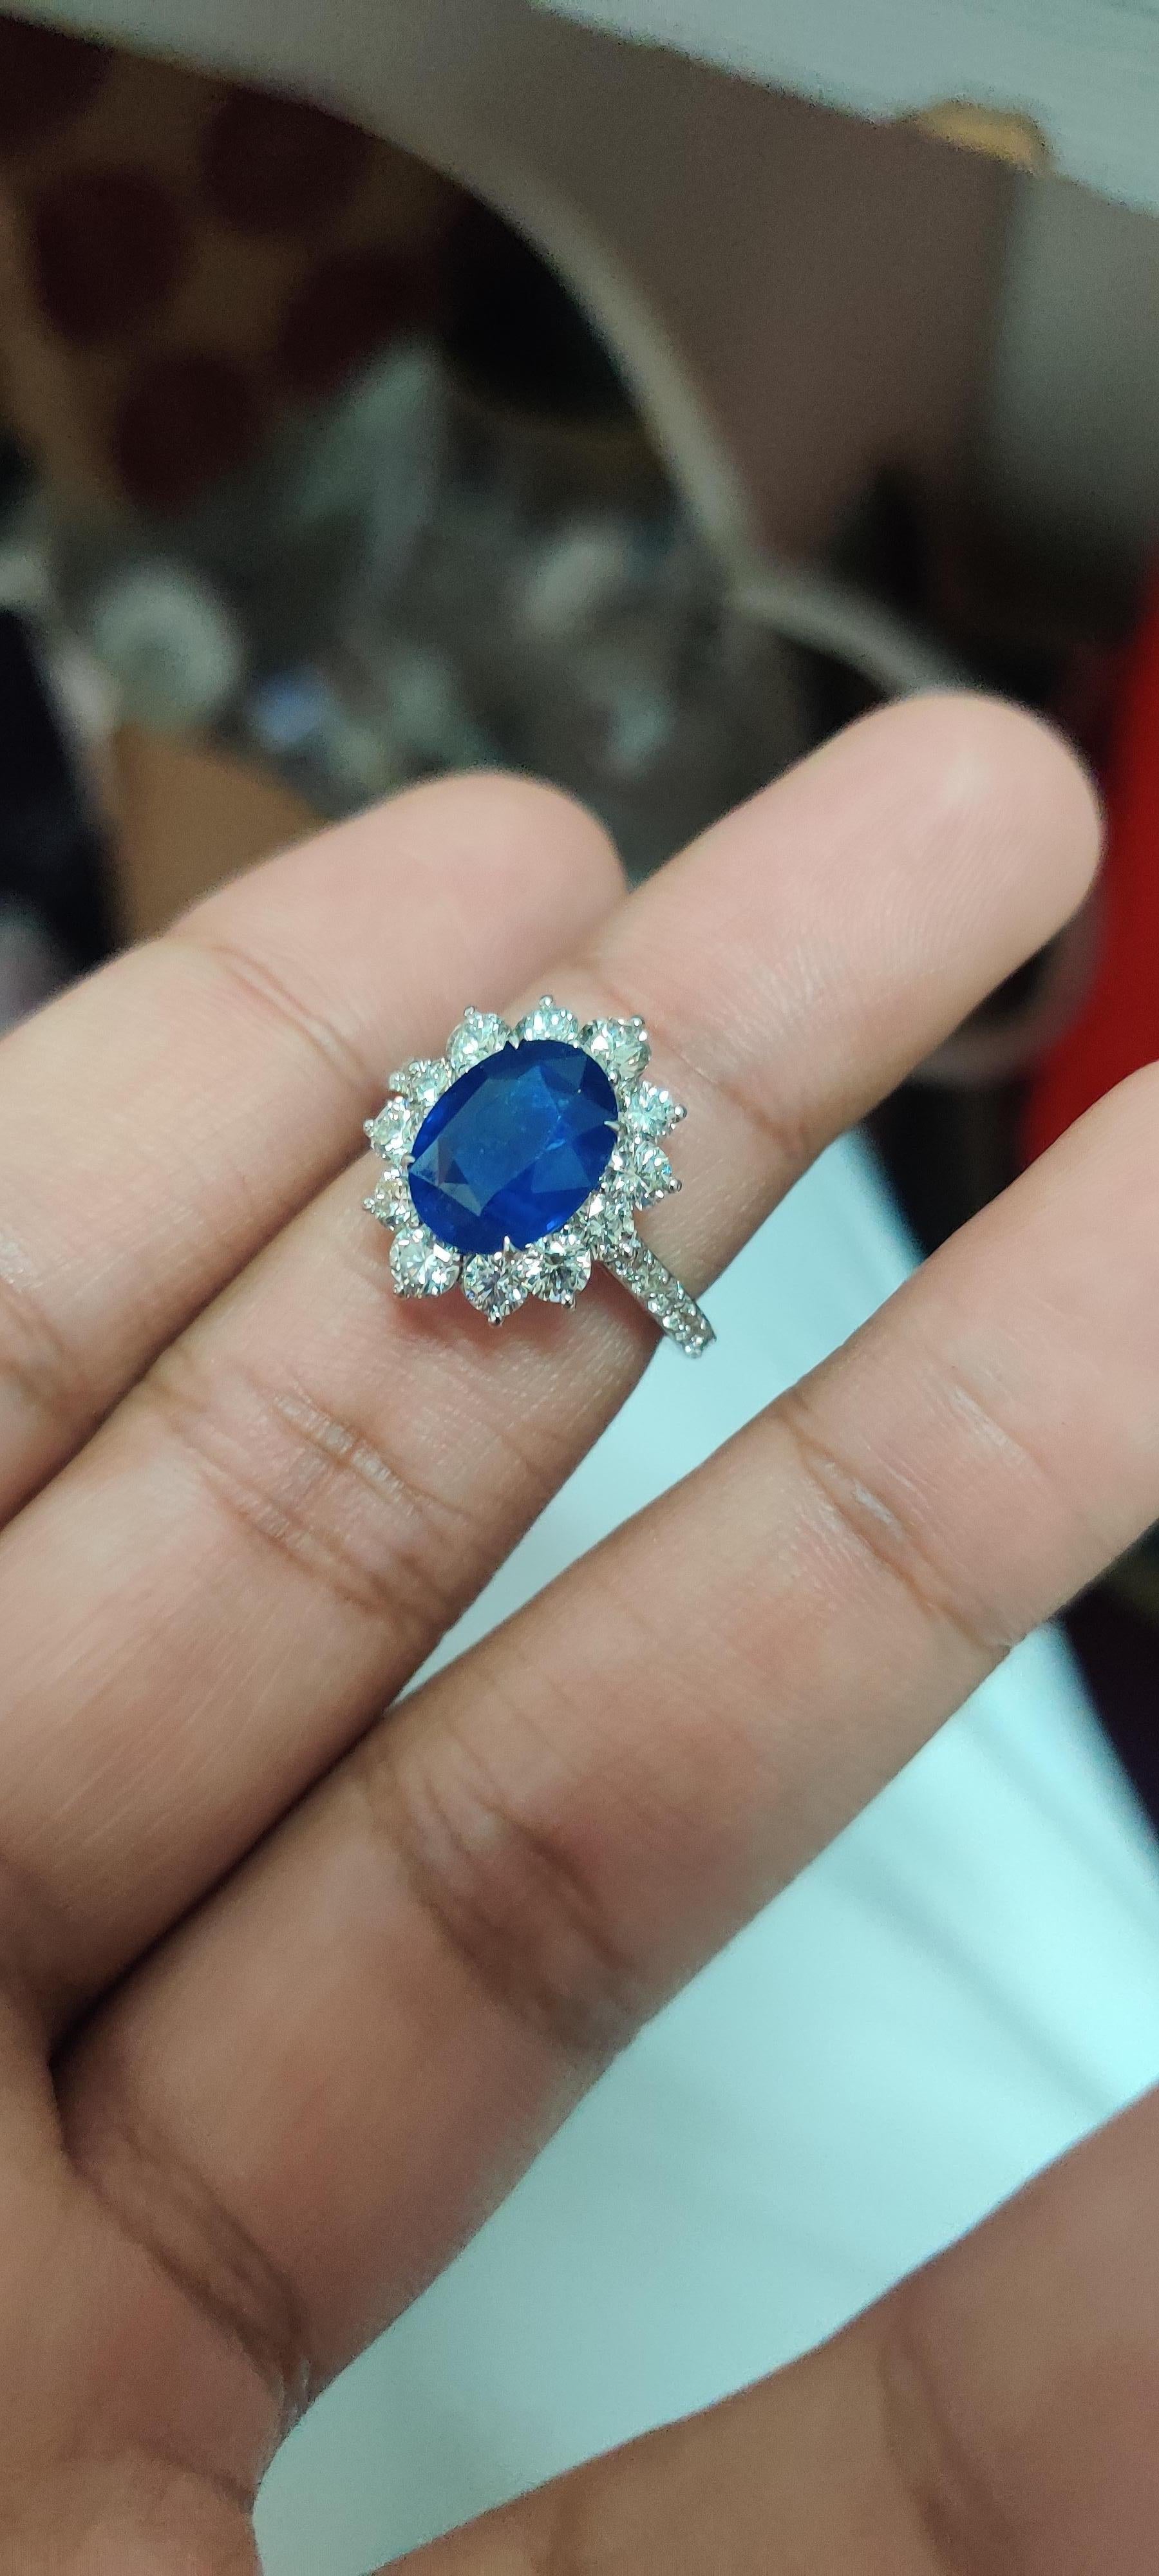 4.19 Carat Sapphire Diamond Cocktail Ring For Sale 1